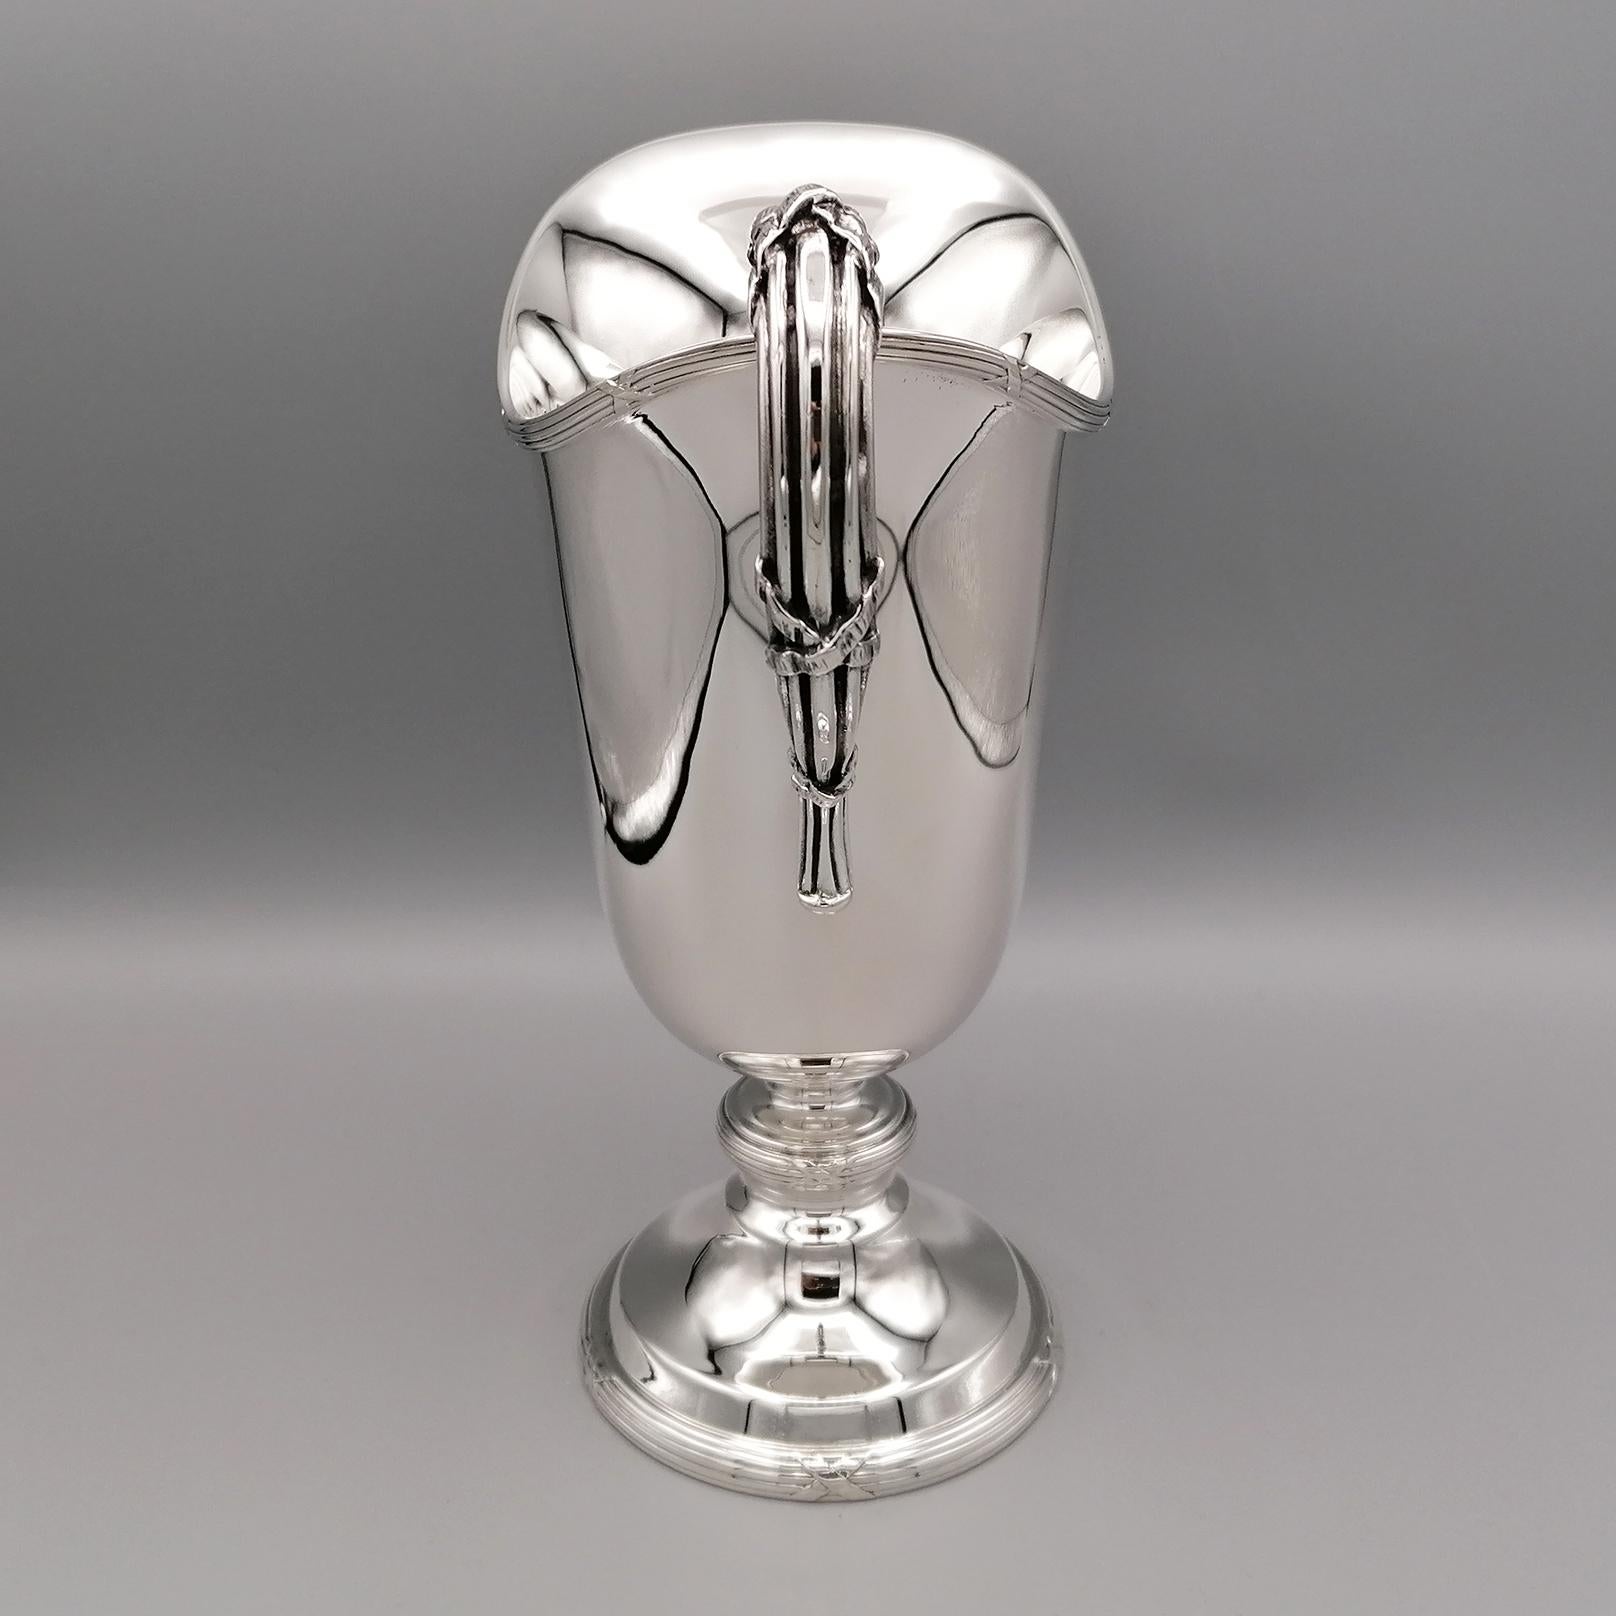 Contemporary 21st Century Italian Buccellati Sterling Silver Pitcher For Sale